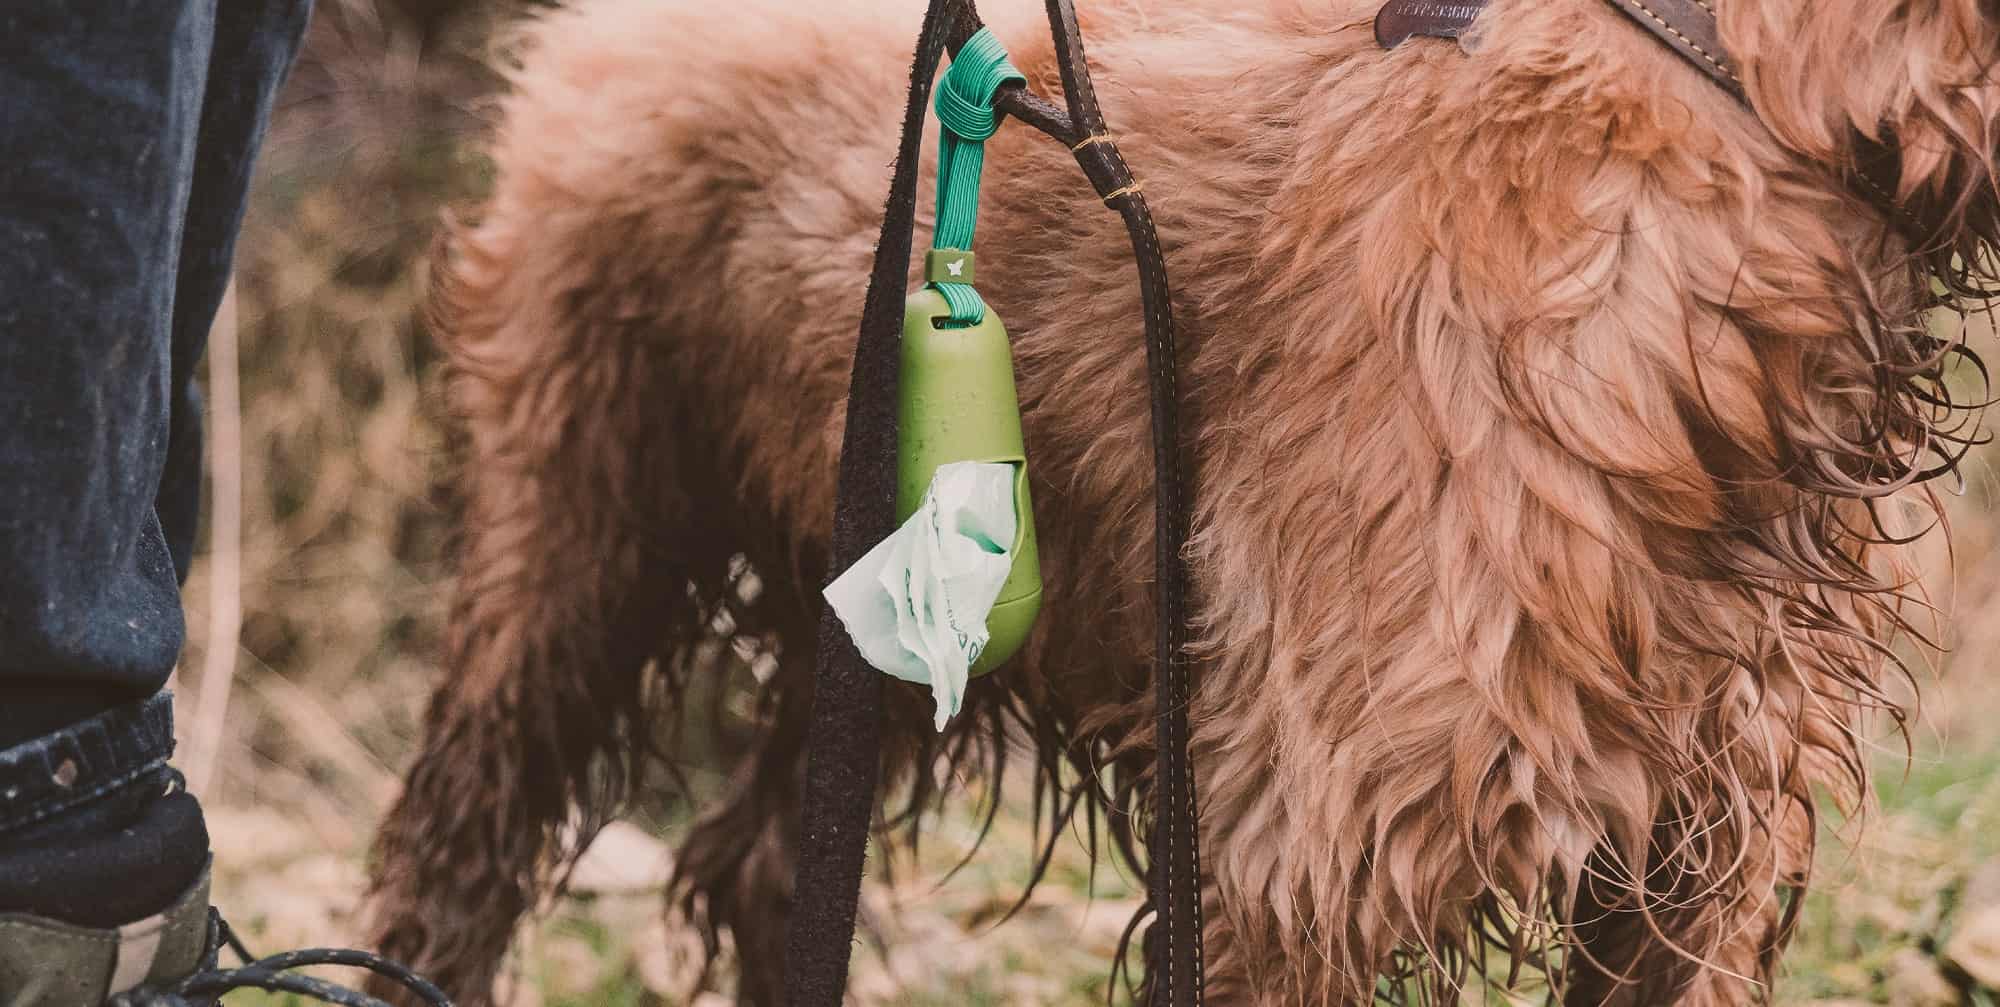 Clip a dog poop bag dispenser to your dog's leash or collar and let him carry the bags.